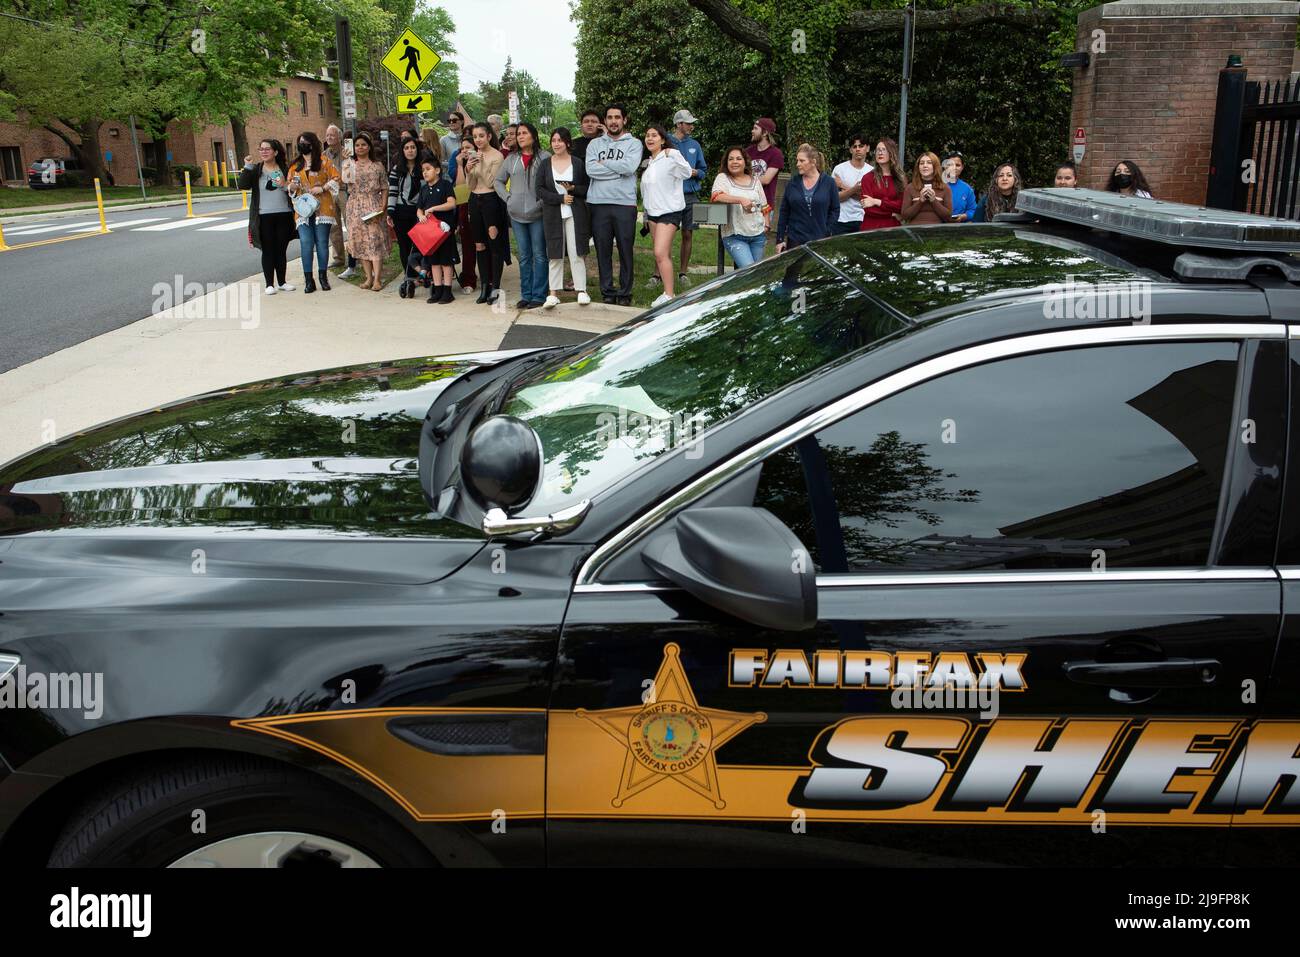 Fairfax County Sheriffs Deputies provide crowd control for the departures of Amber Heard and Johnny Deep from the Fairfax County Courthouse, in Fairfax, at the close of another day in his civil trial with Amber Heard, Thursday, May 5, 2022. Depp brought a defamation lawsuit against his former wife, actress Amber Heard, after she wrote an op-ed in The Washington Post in 2018 that, without naming Depp, accused him of domestic abuse. Credit: Cliff Owen/CNP (RESTRICTION: NO New York or New Jersey Newspapers or newspapers within a 75 mile radius of New York City) Stock Photo